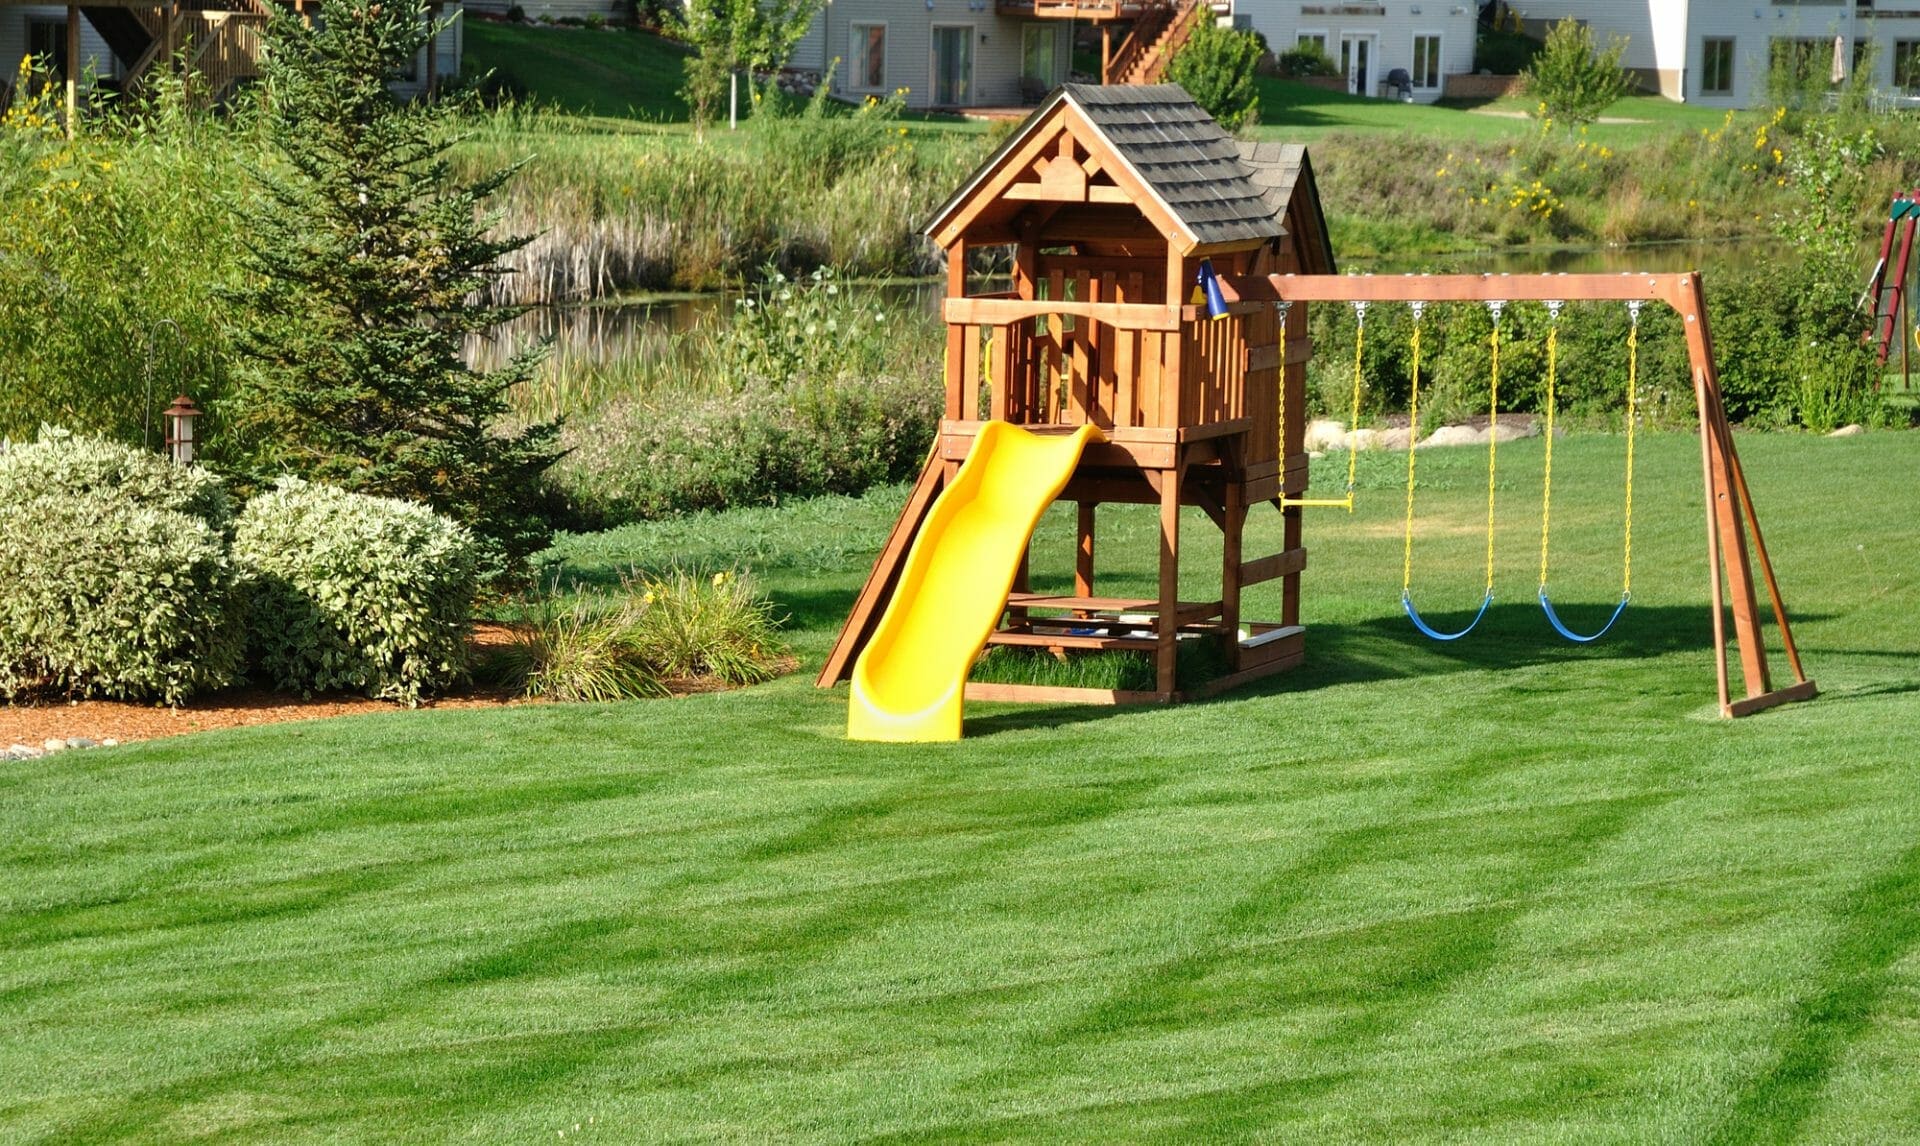 safe clean cut yard with swing set